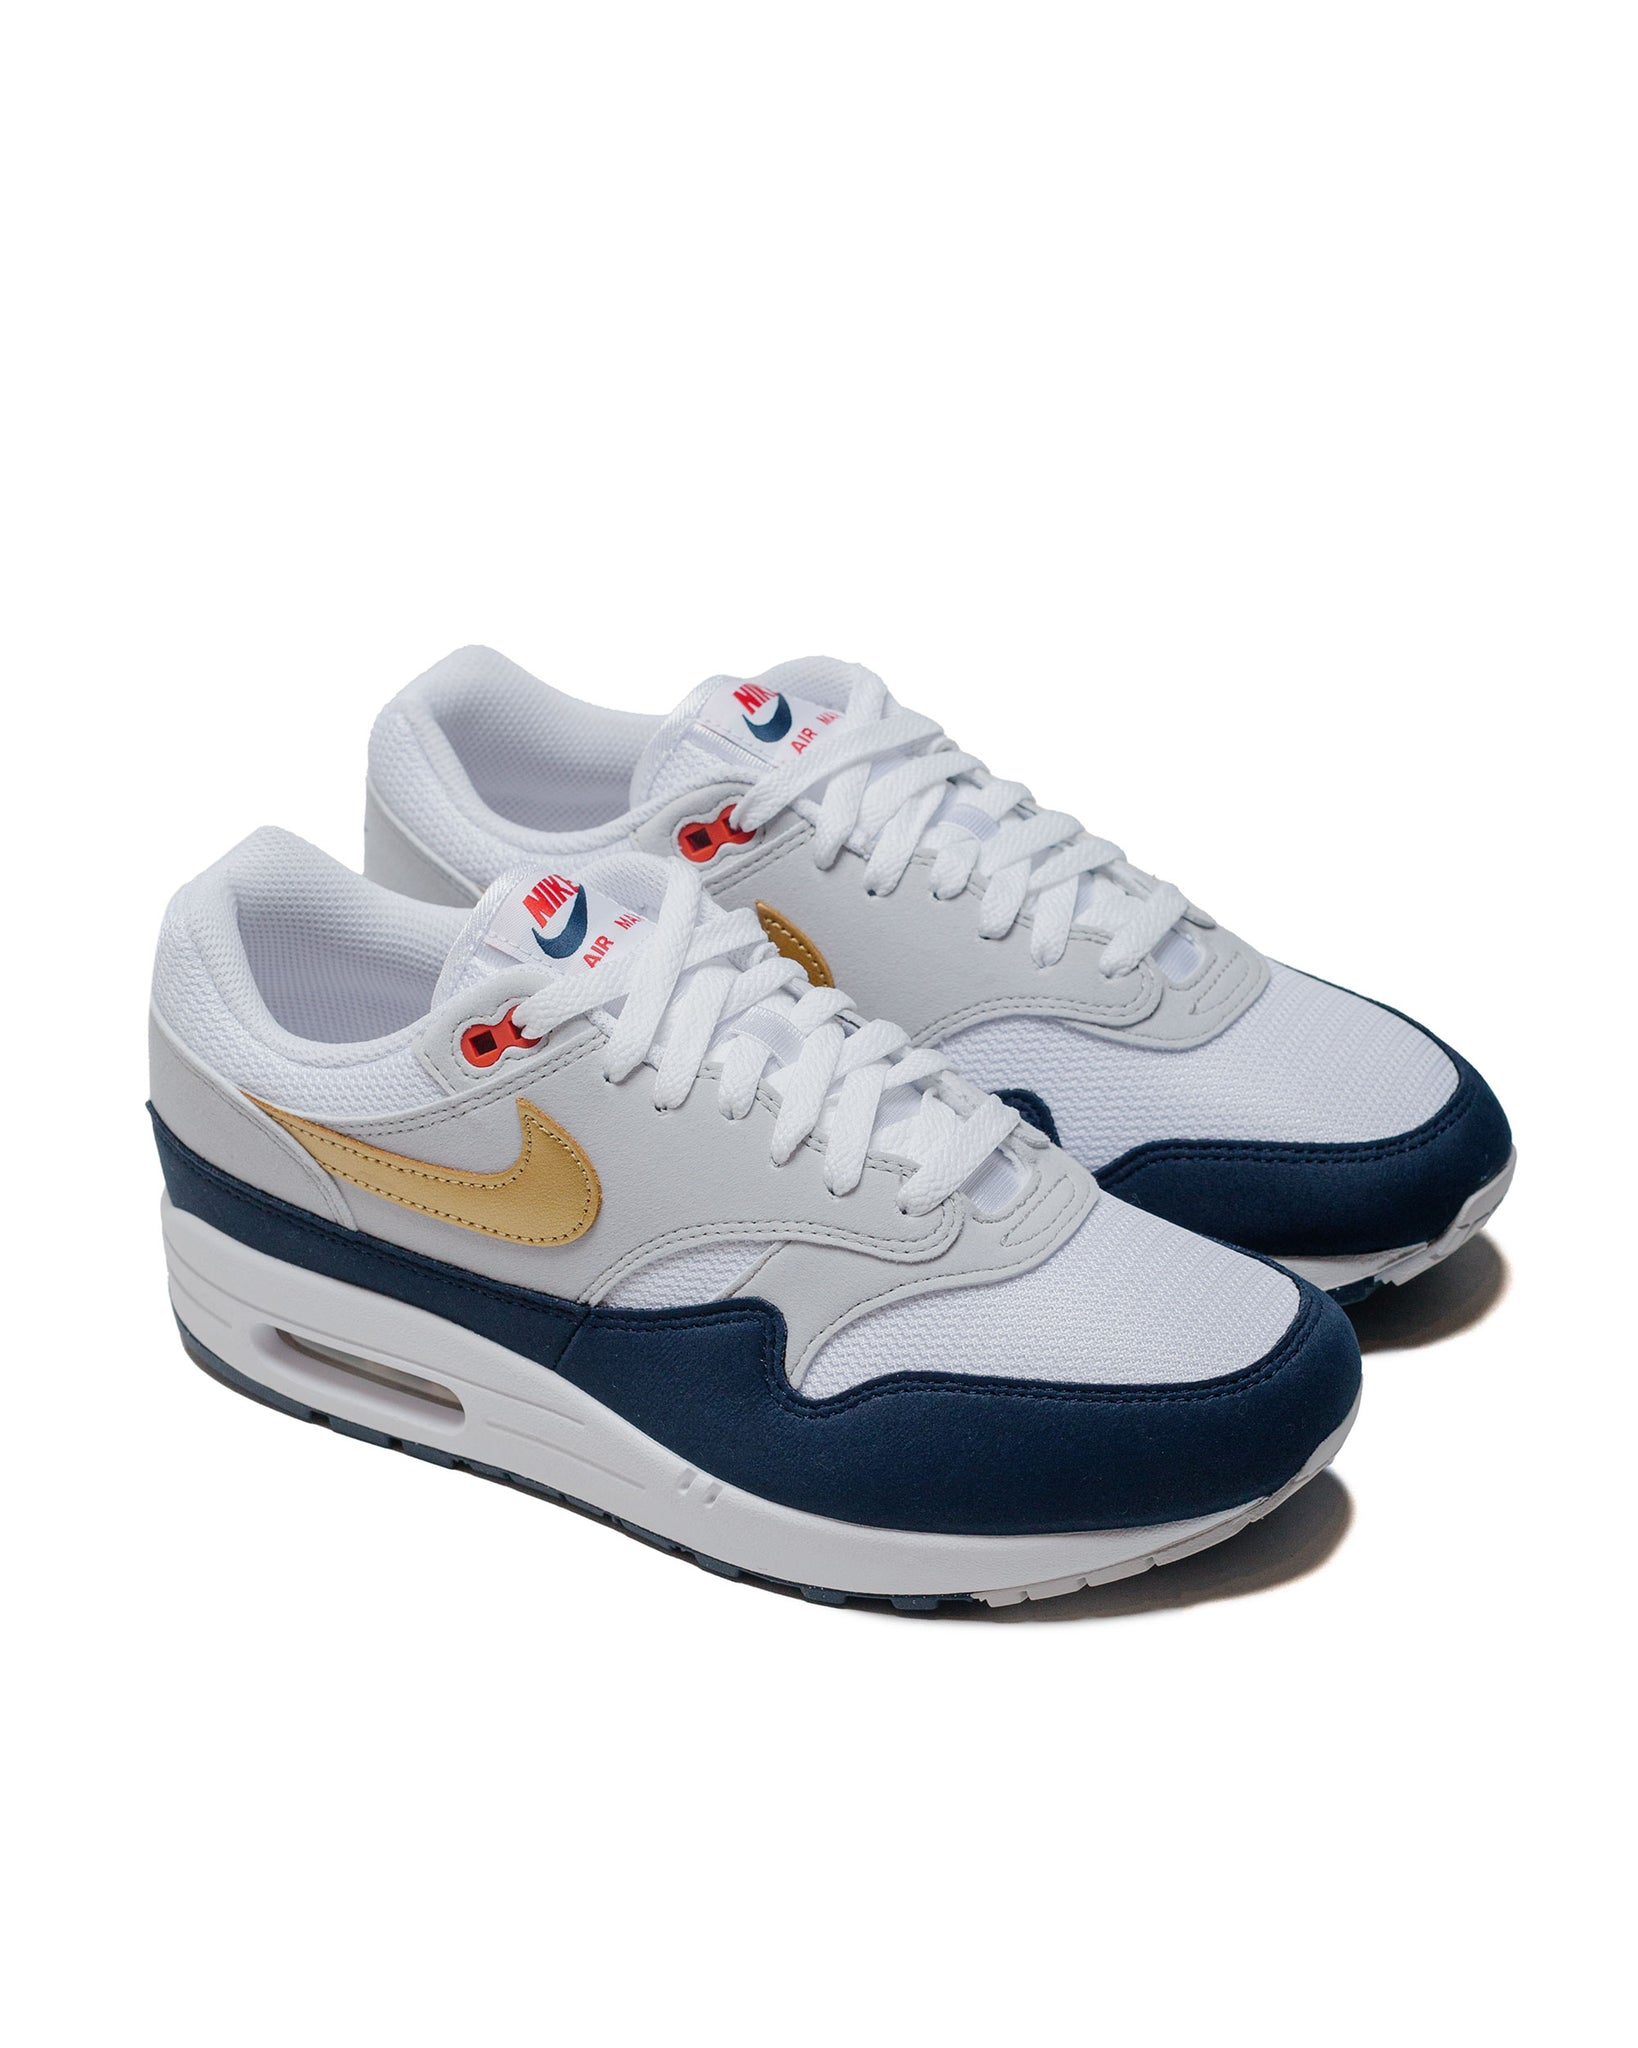 Nike Air Max 1 'Olympic' side